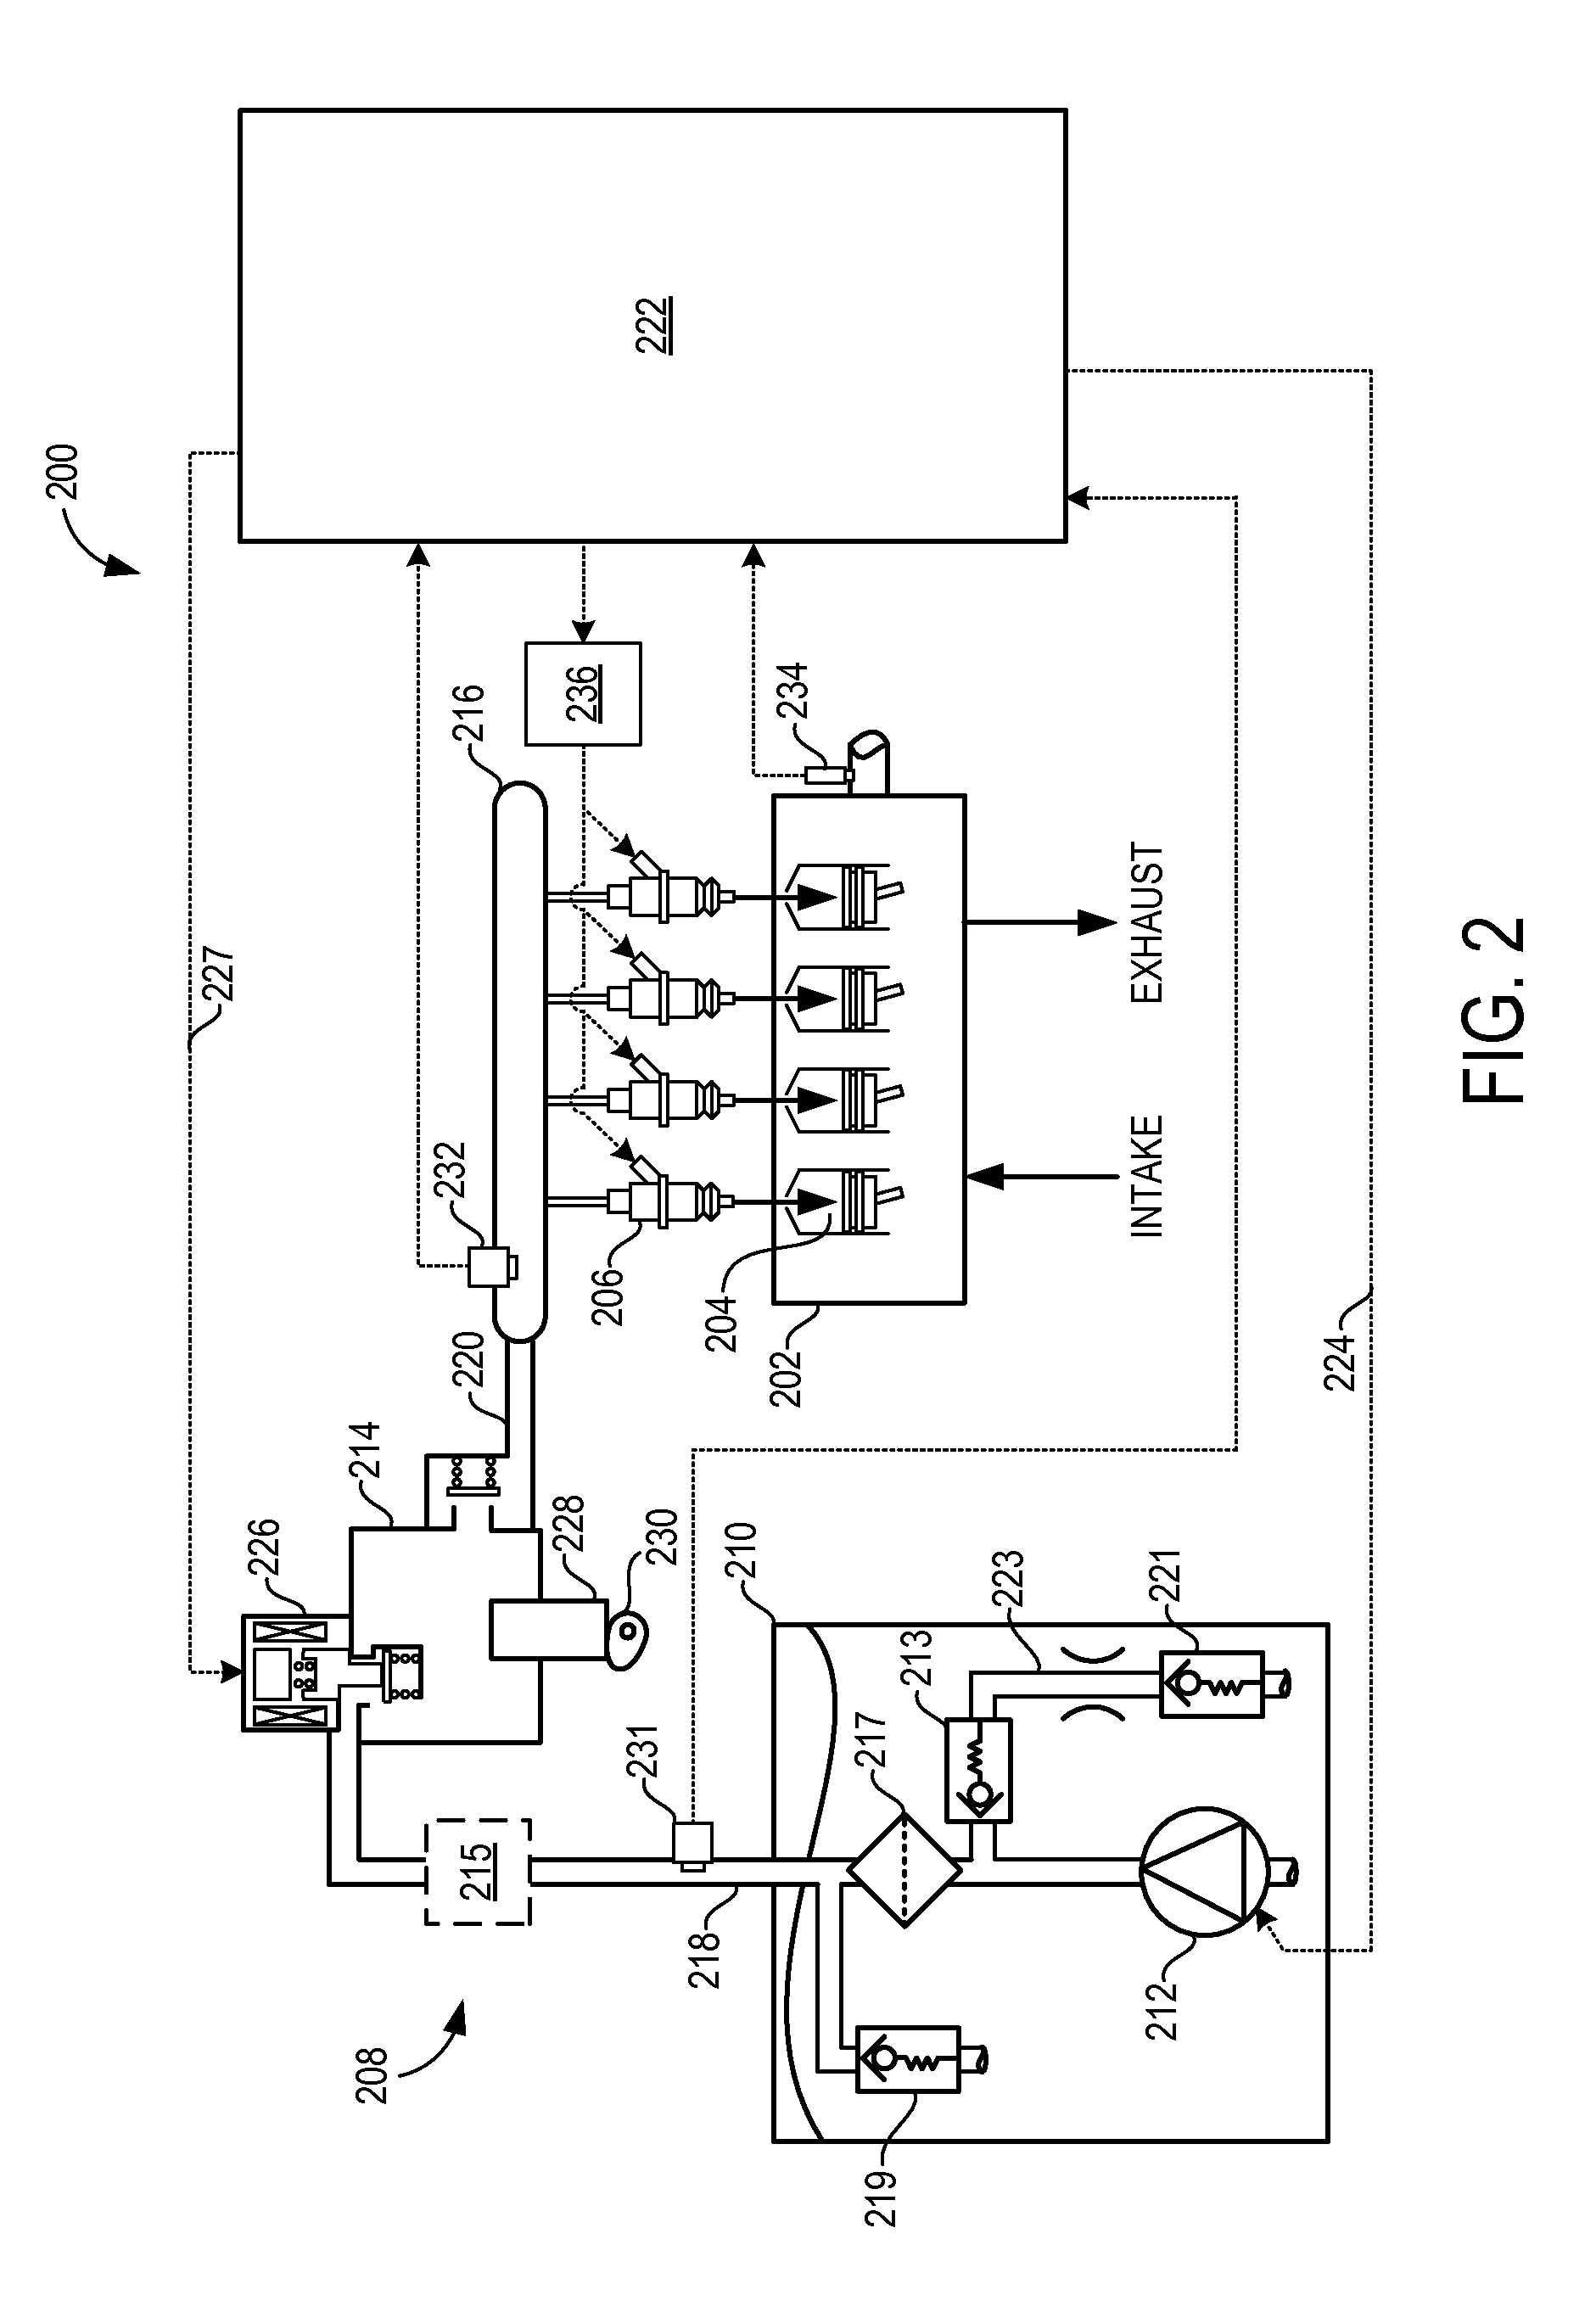 Method and system for fuel system control